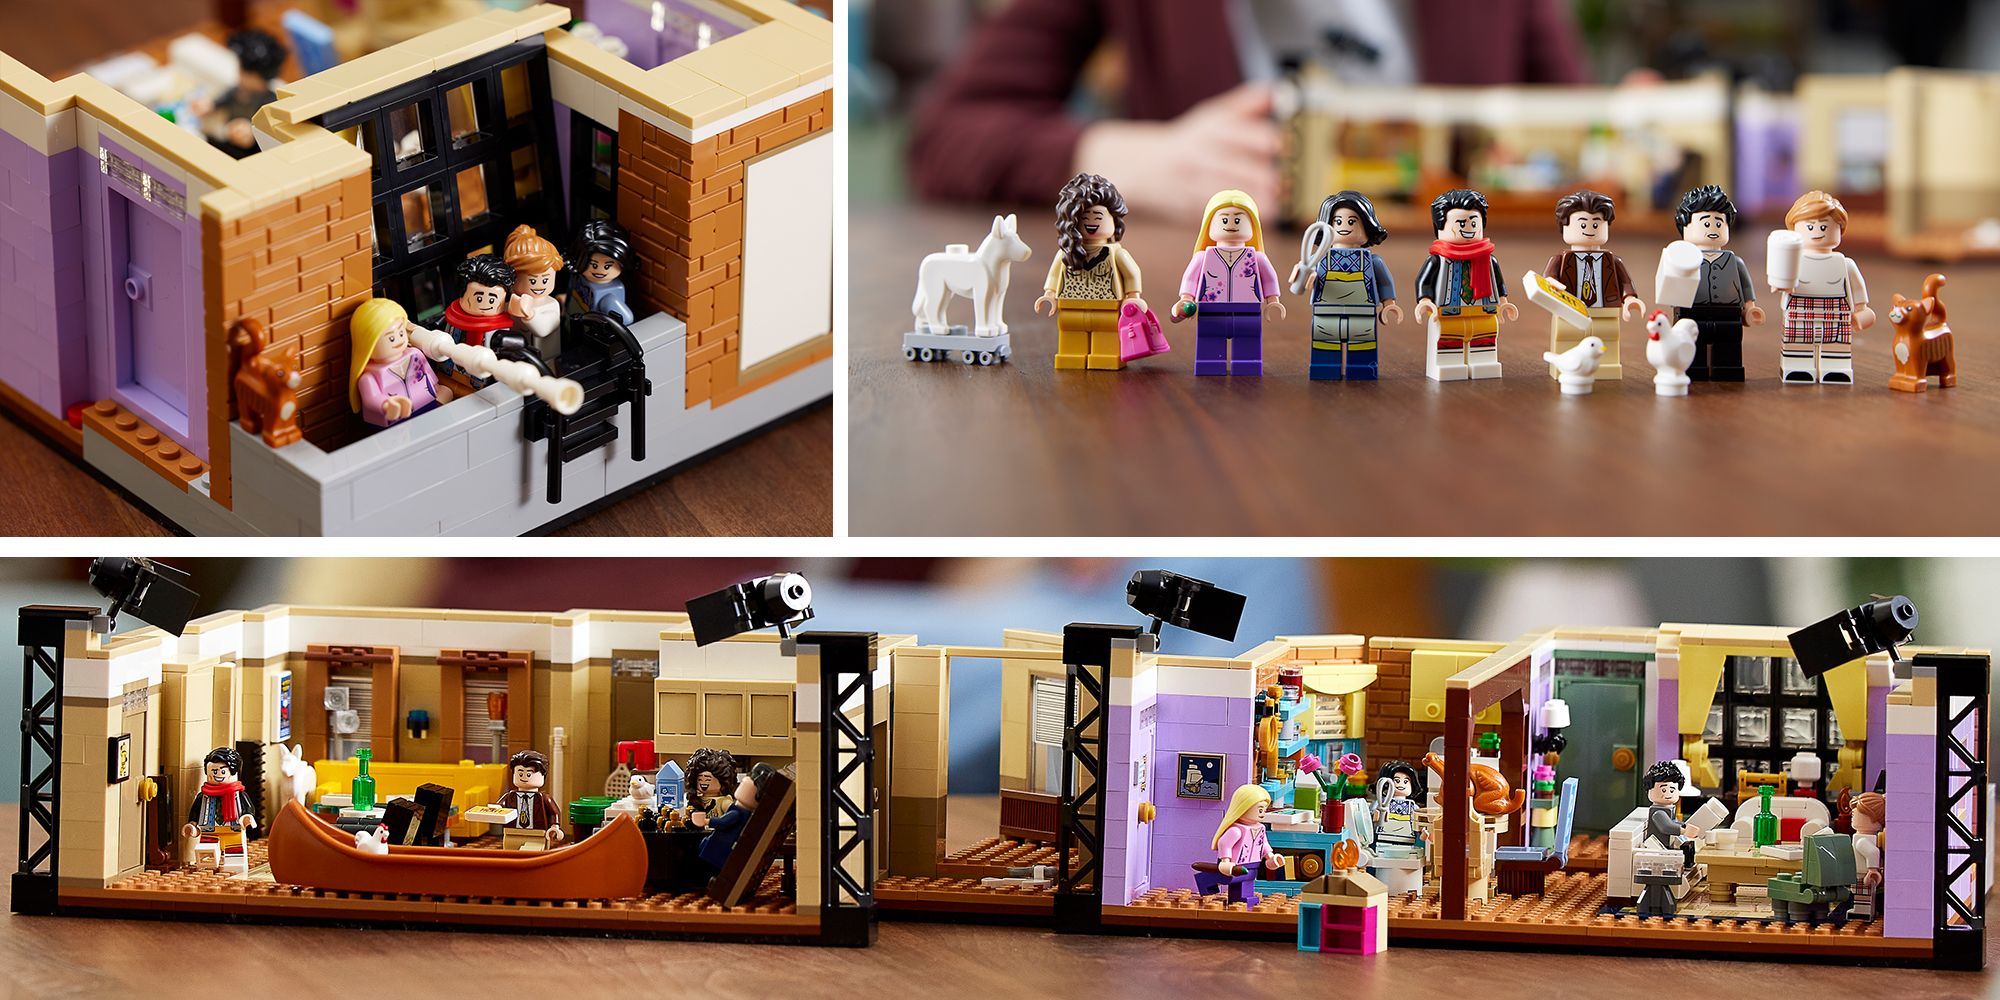 The iconic F.R.I.E.N.D.S apartments have been recreated in a 2,048 piece set